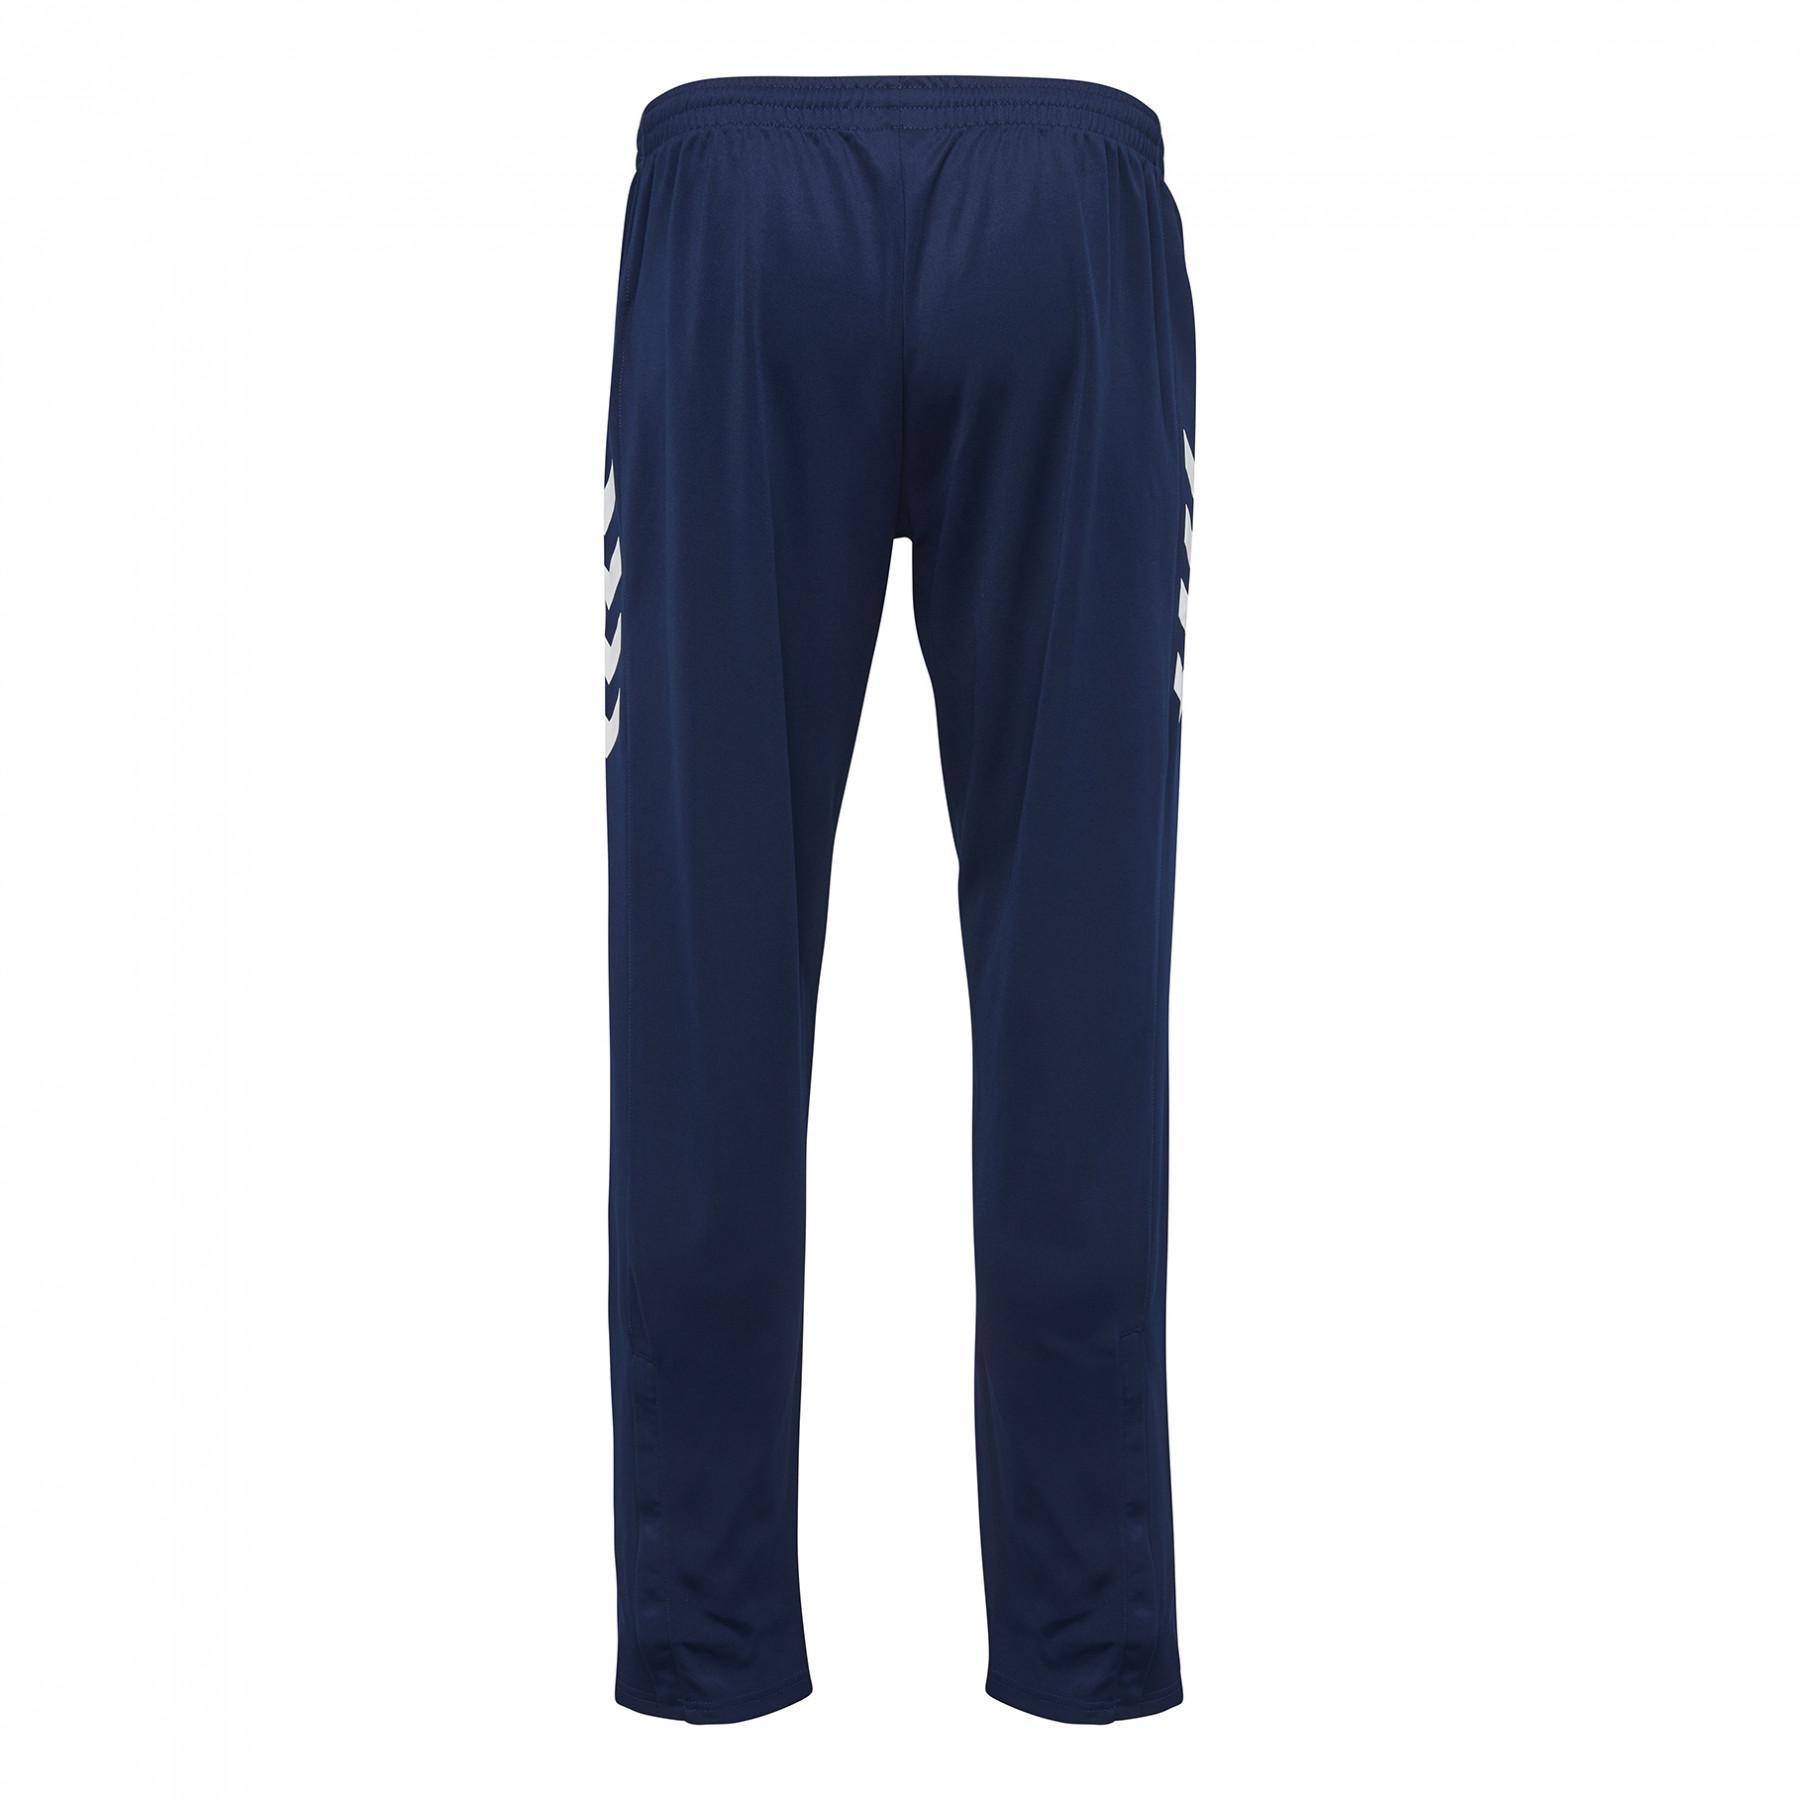 Children's trousers Hummel hmlCORE poly